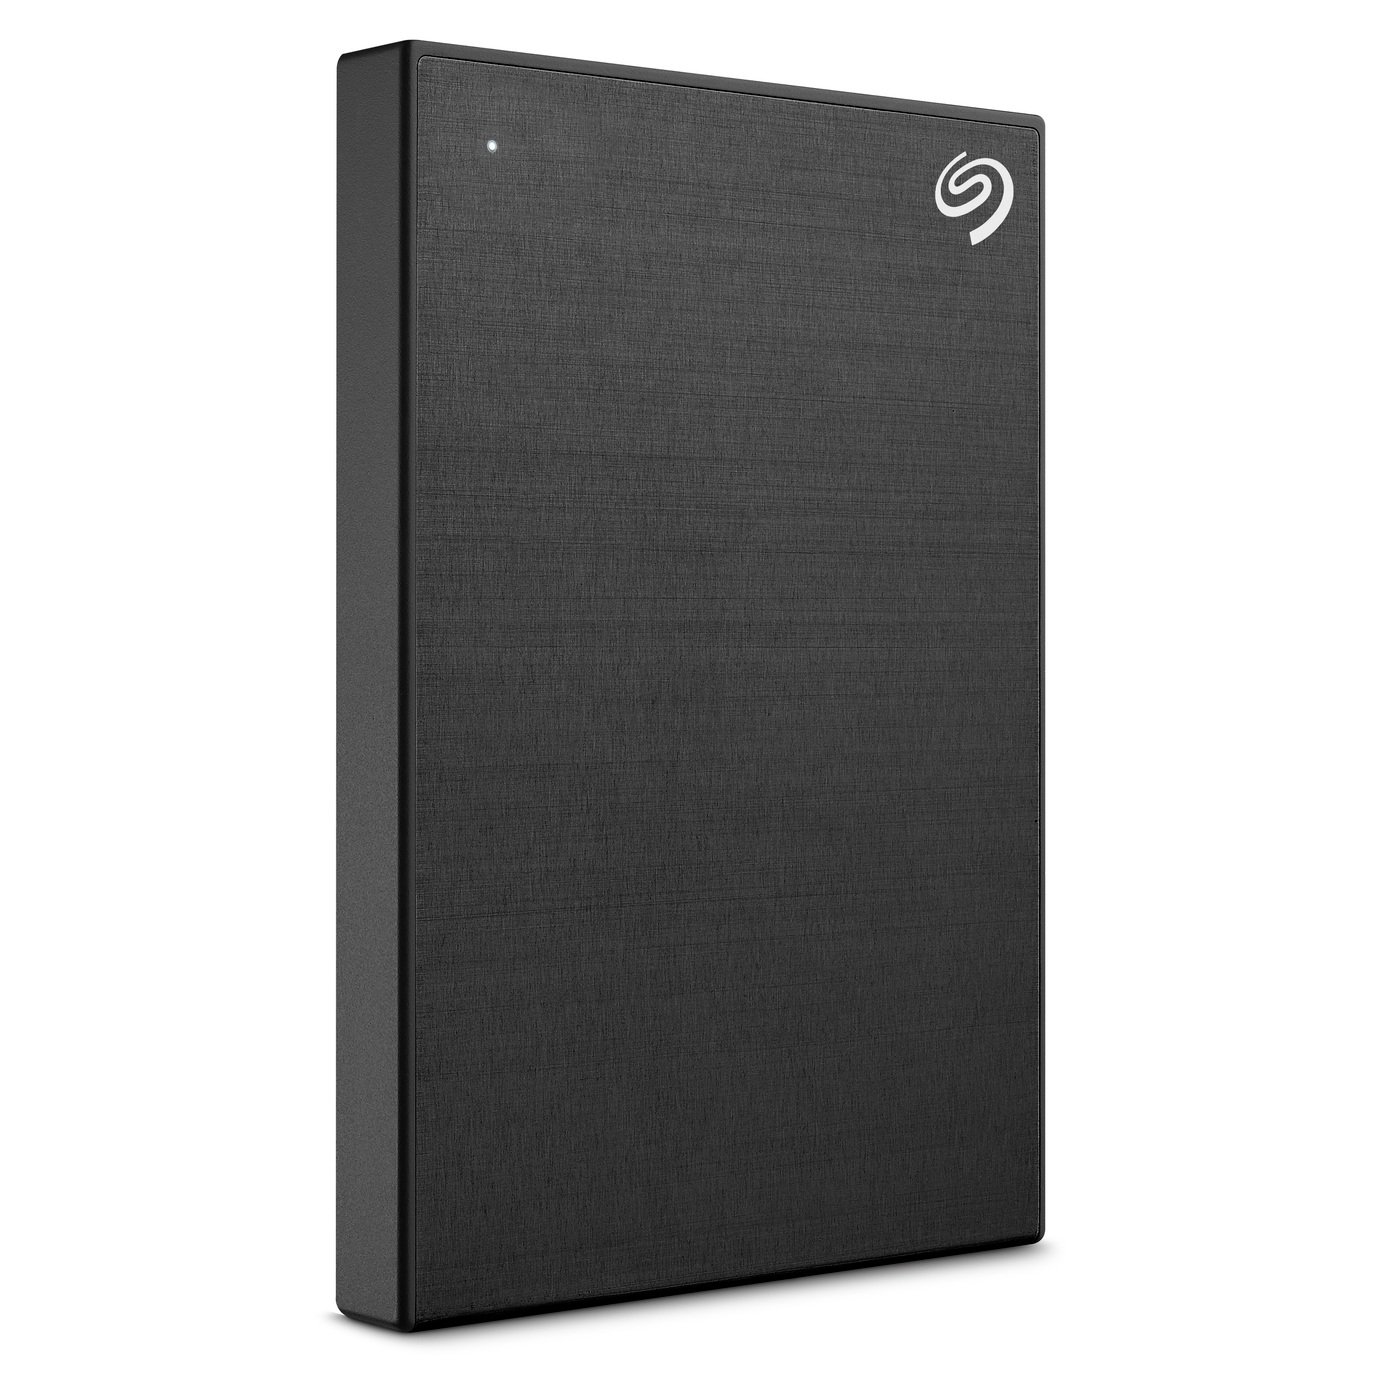 Seagate Backup Up 2TB Portable Hard Drive Review